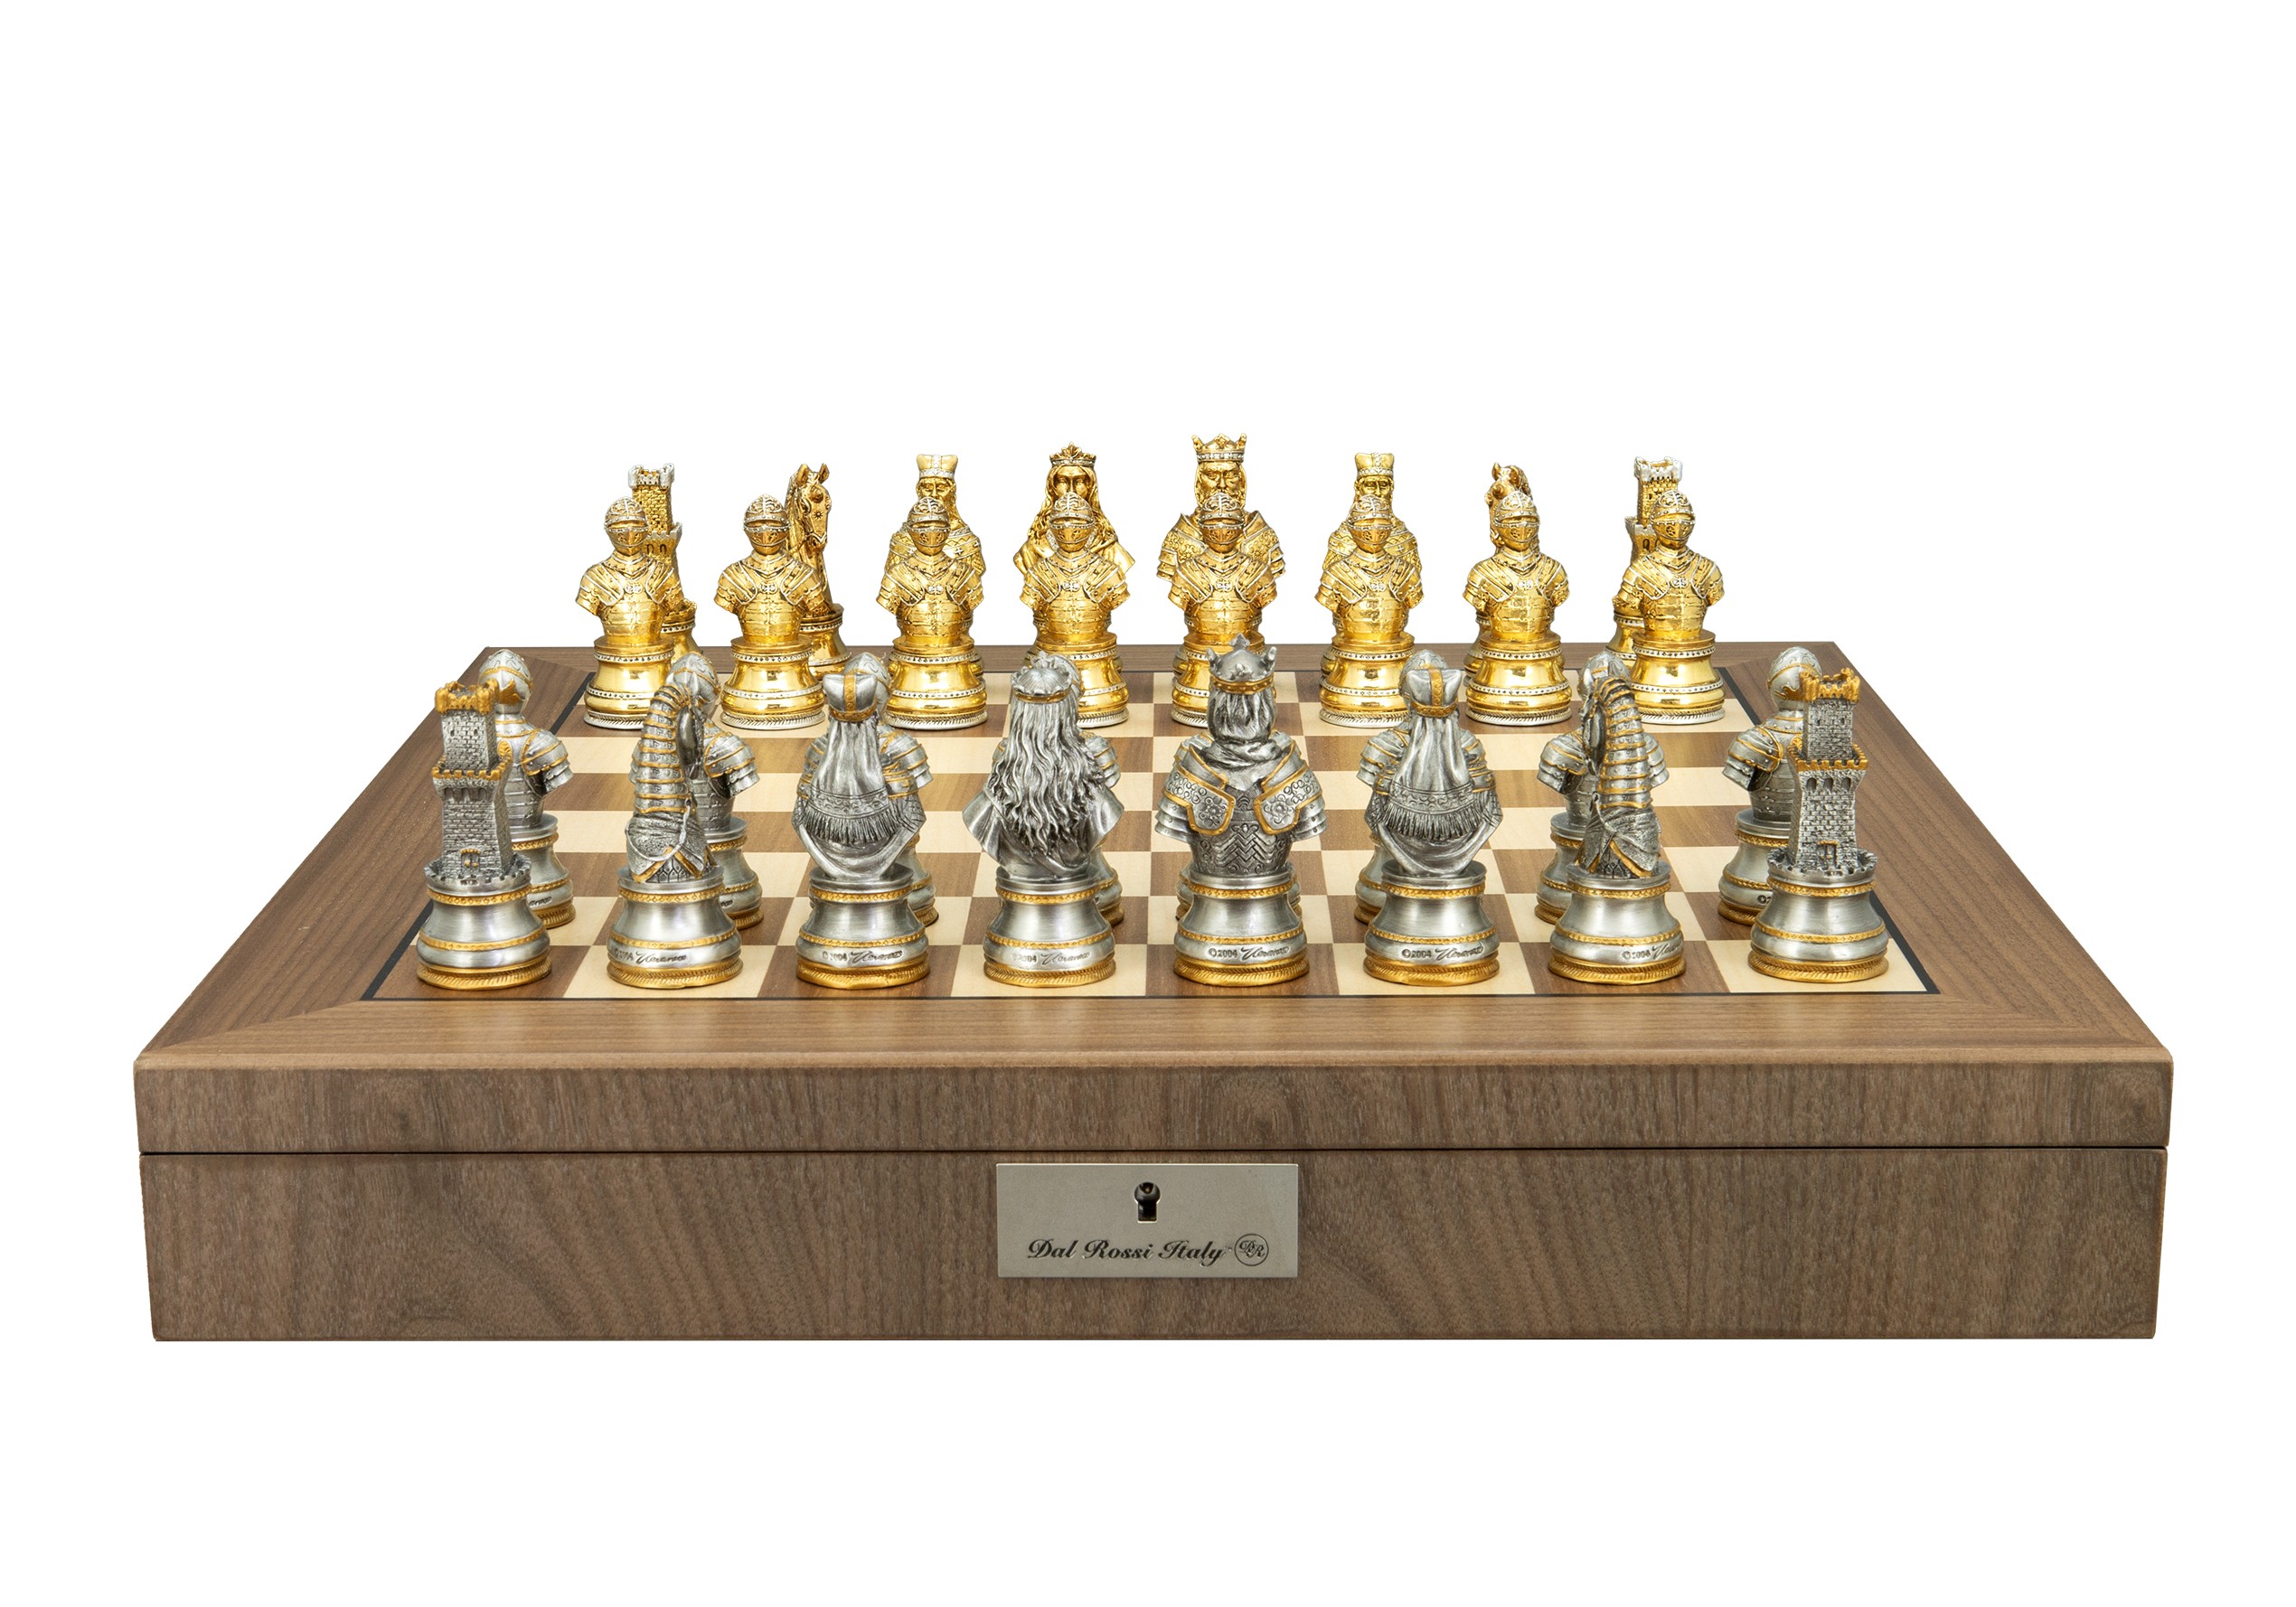 Dal Rossi Italy, Medieval Warriors chessmen on a Walnut Inlaid Chess Box with Compartments 20"